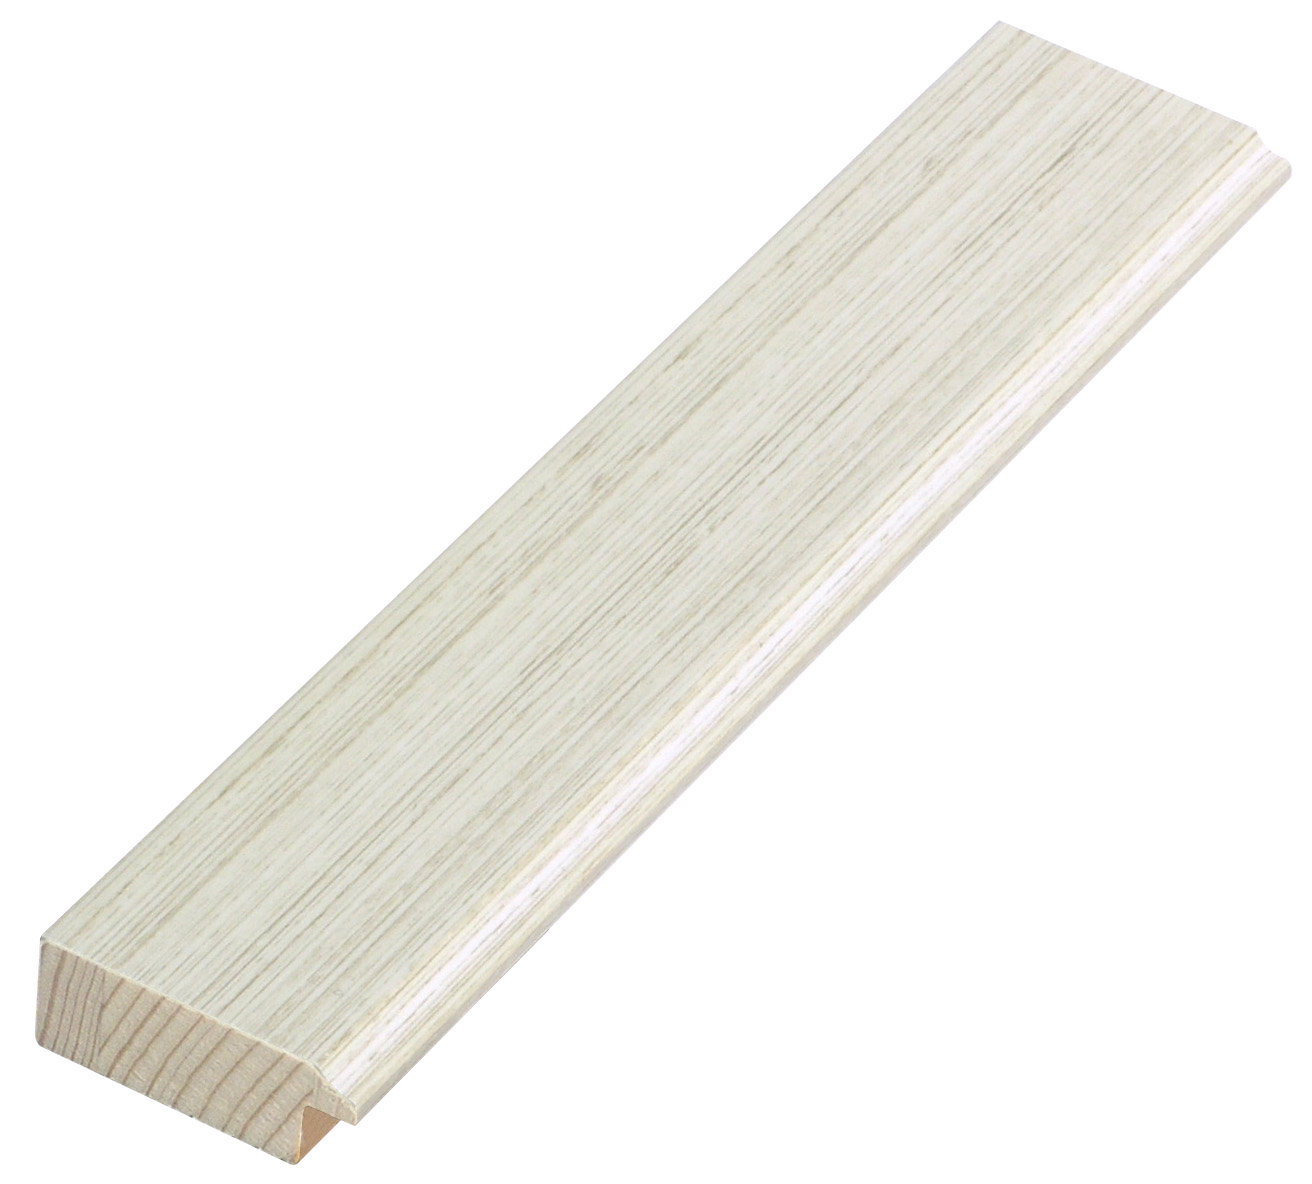 Liner finger-jointed pine 38mm - Cream, wired texture - 38CREMA